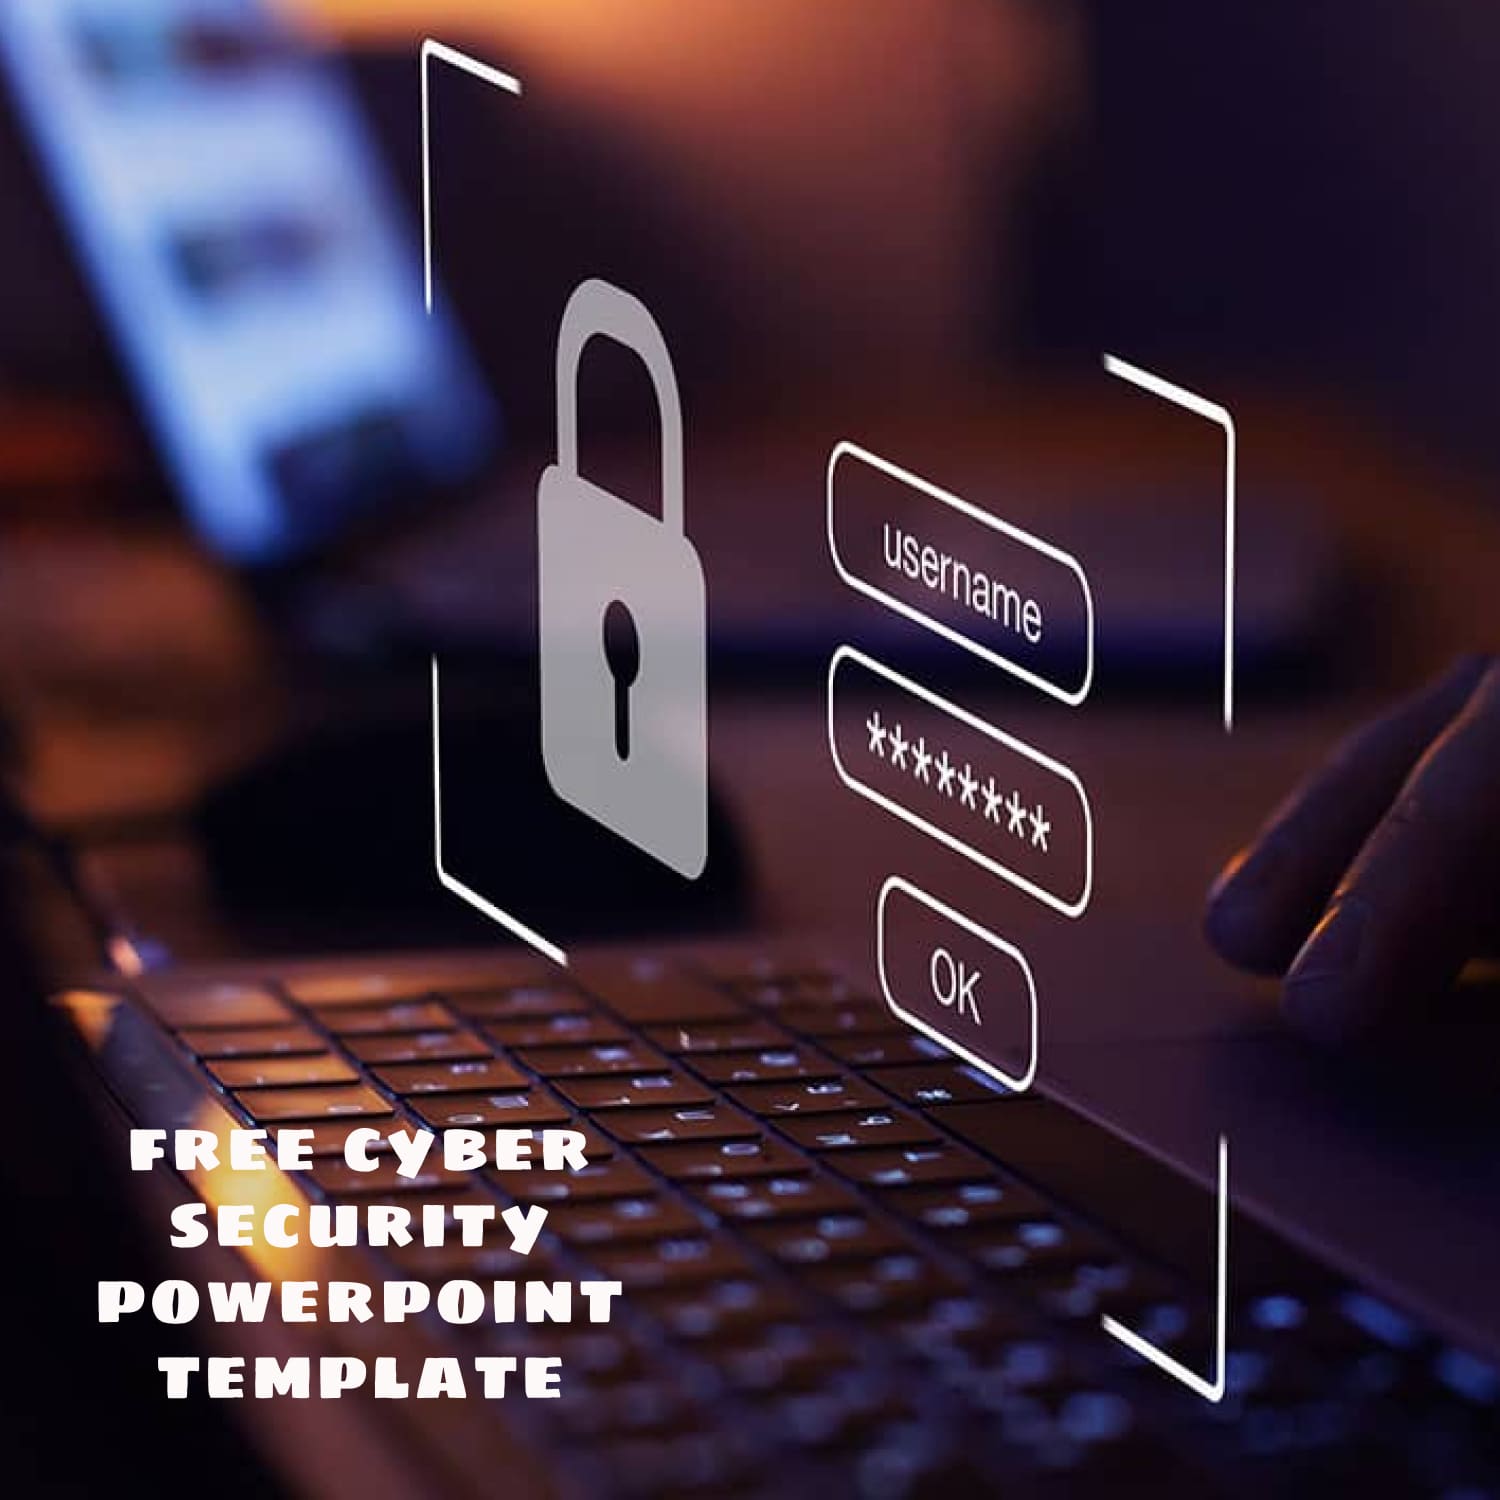 free-cyber-security-powerpoint-template-5-slides-masterbundles